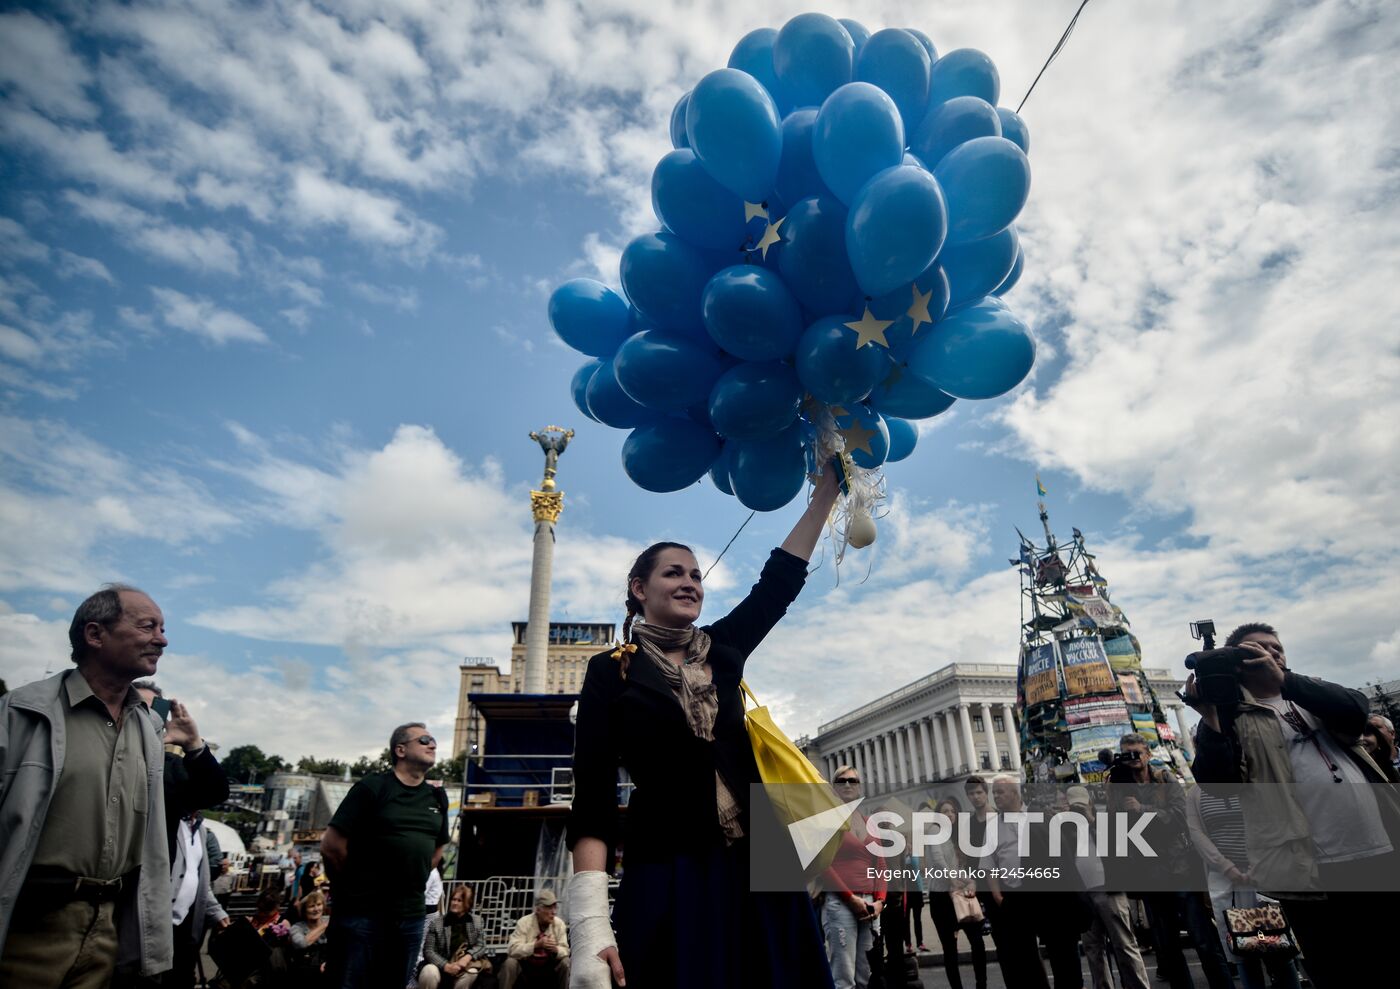 Events held on Kiev's Independence Square